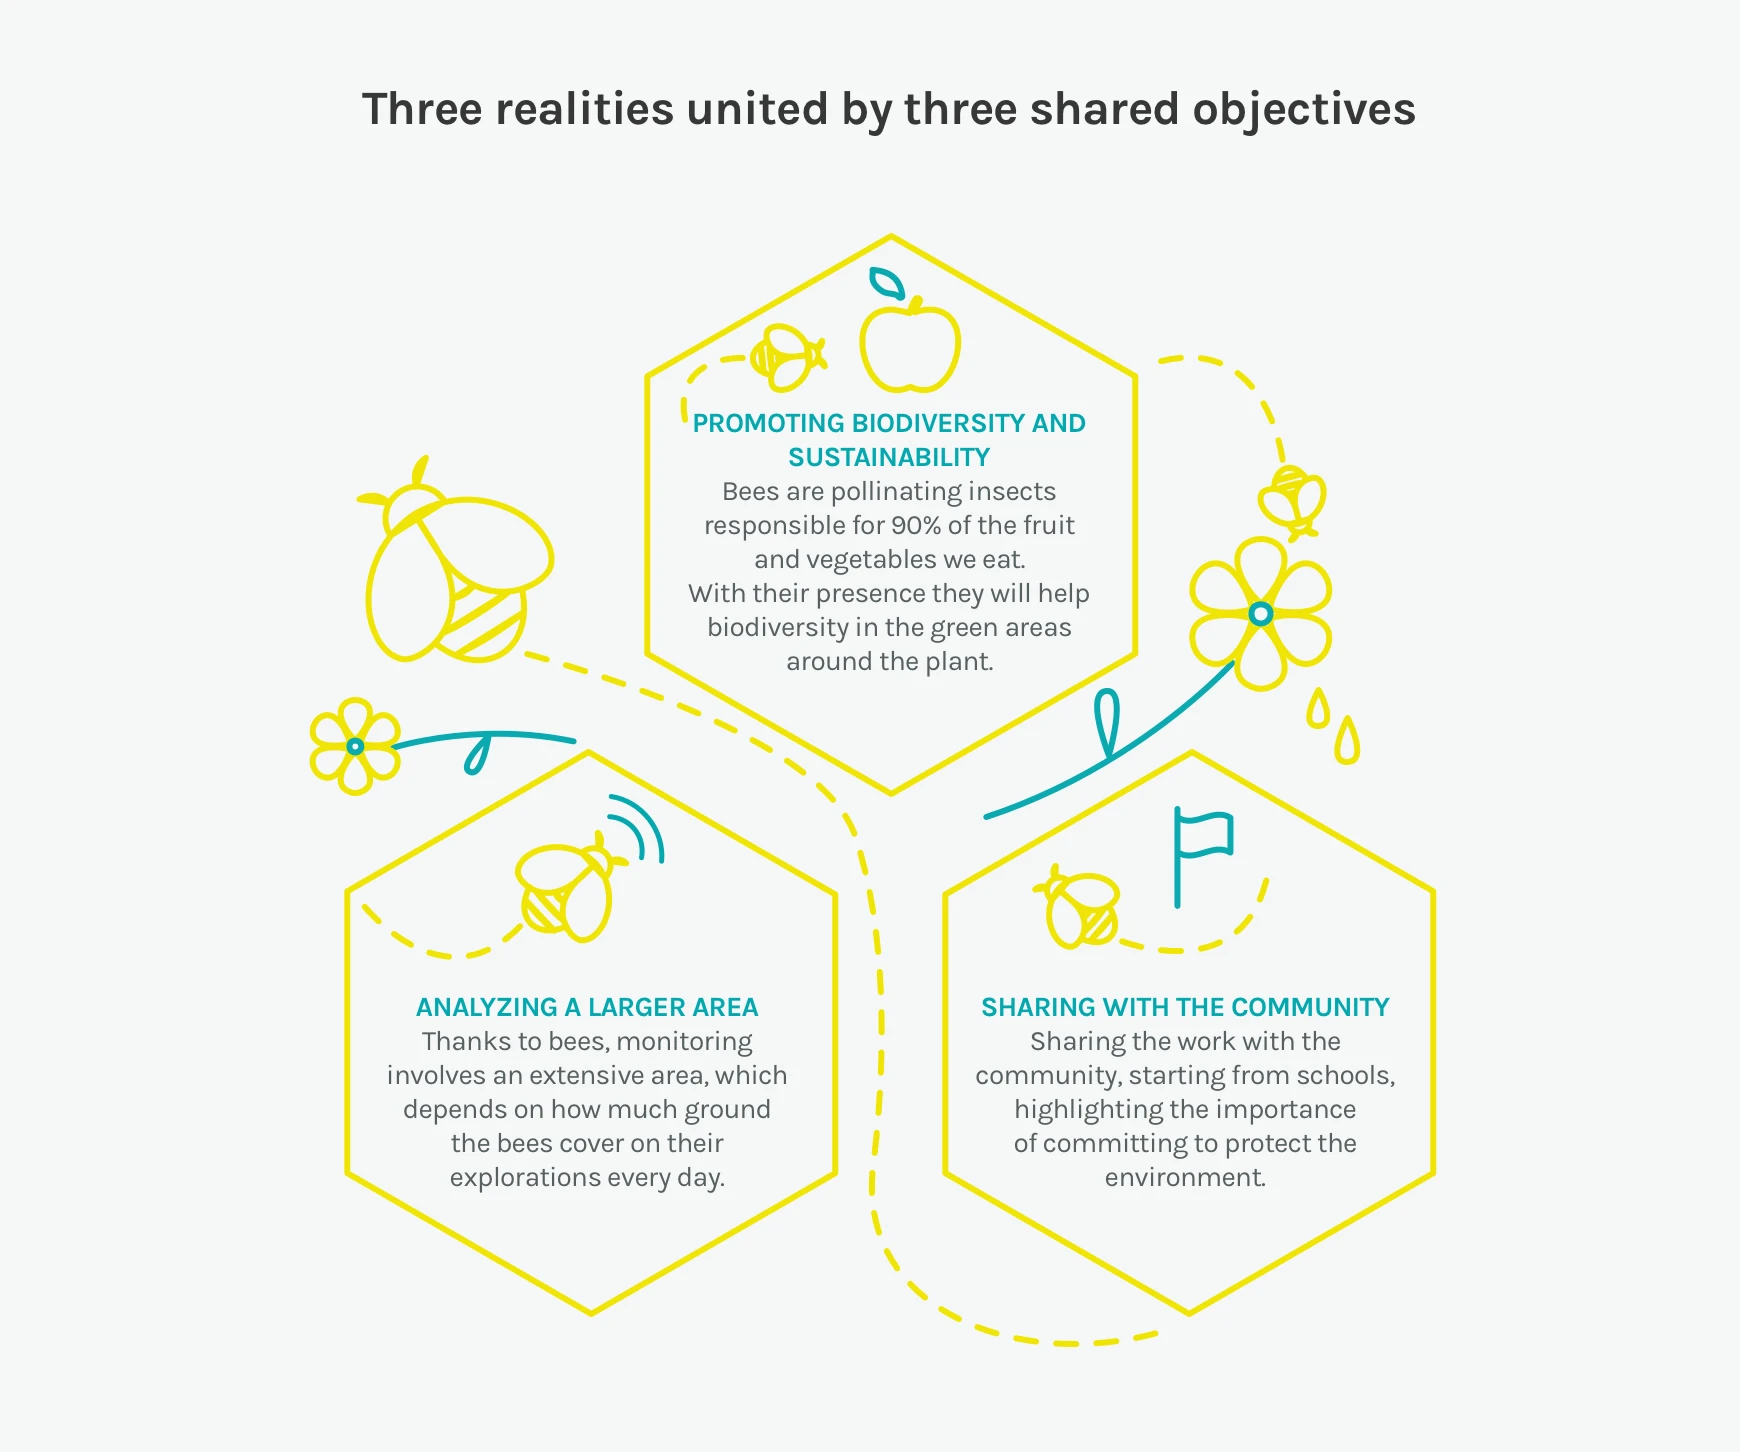 Three realities united by three shared objectives